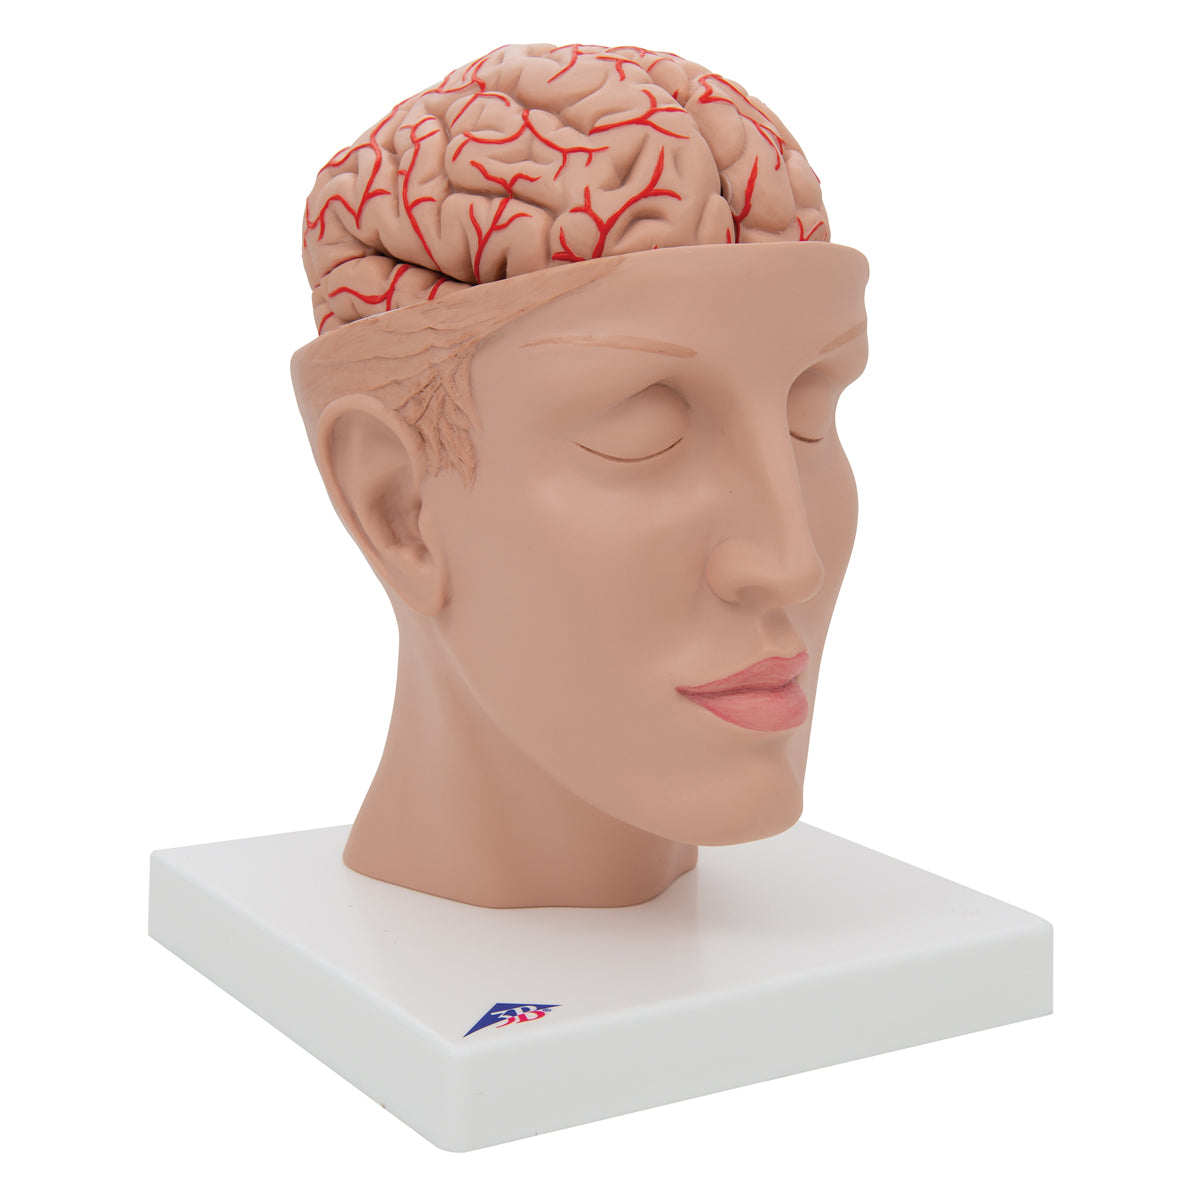 Brain model showing arteries, veins and the internal skull base. The brain can be taken out and divided into 8